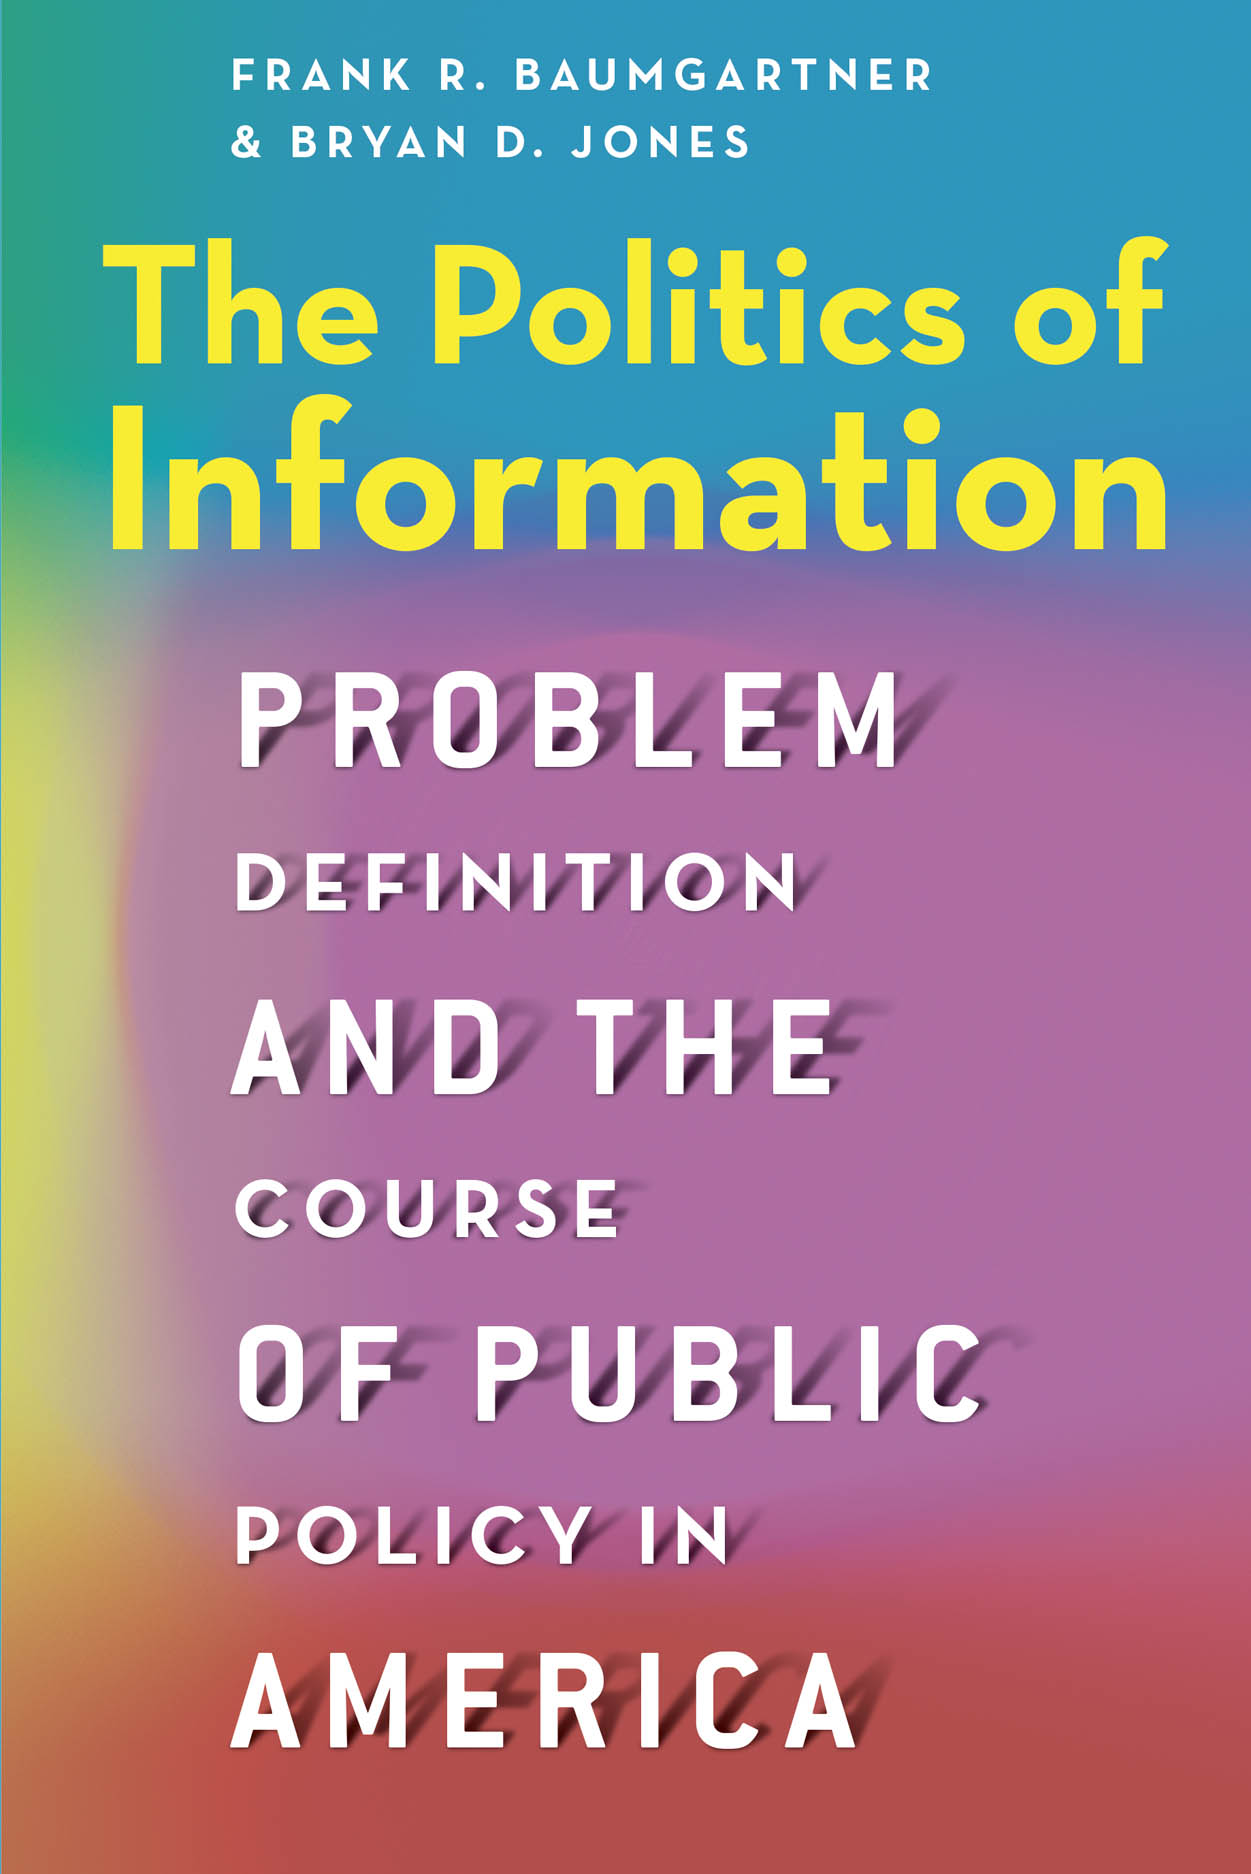 The Politics of Information: Problem Definition and the Course of Public  Policy in America, Baumgartner, Jones